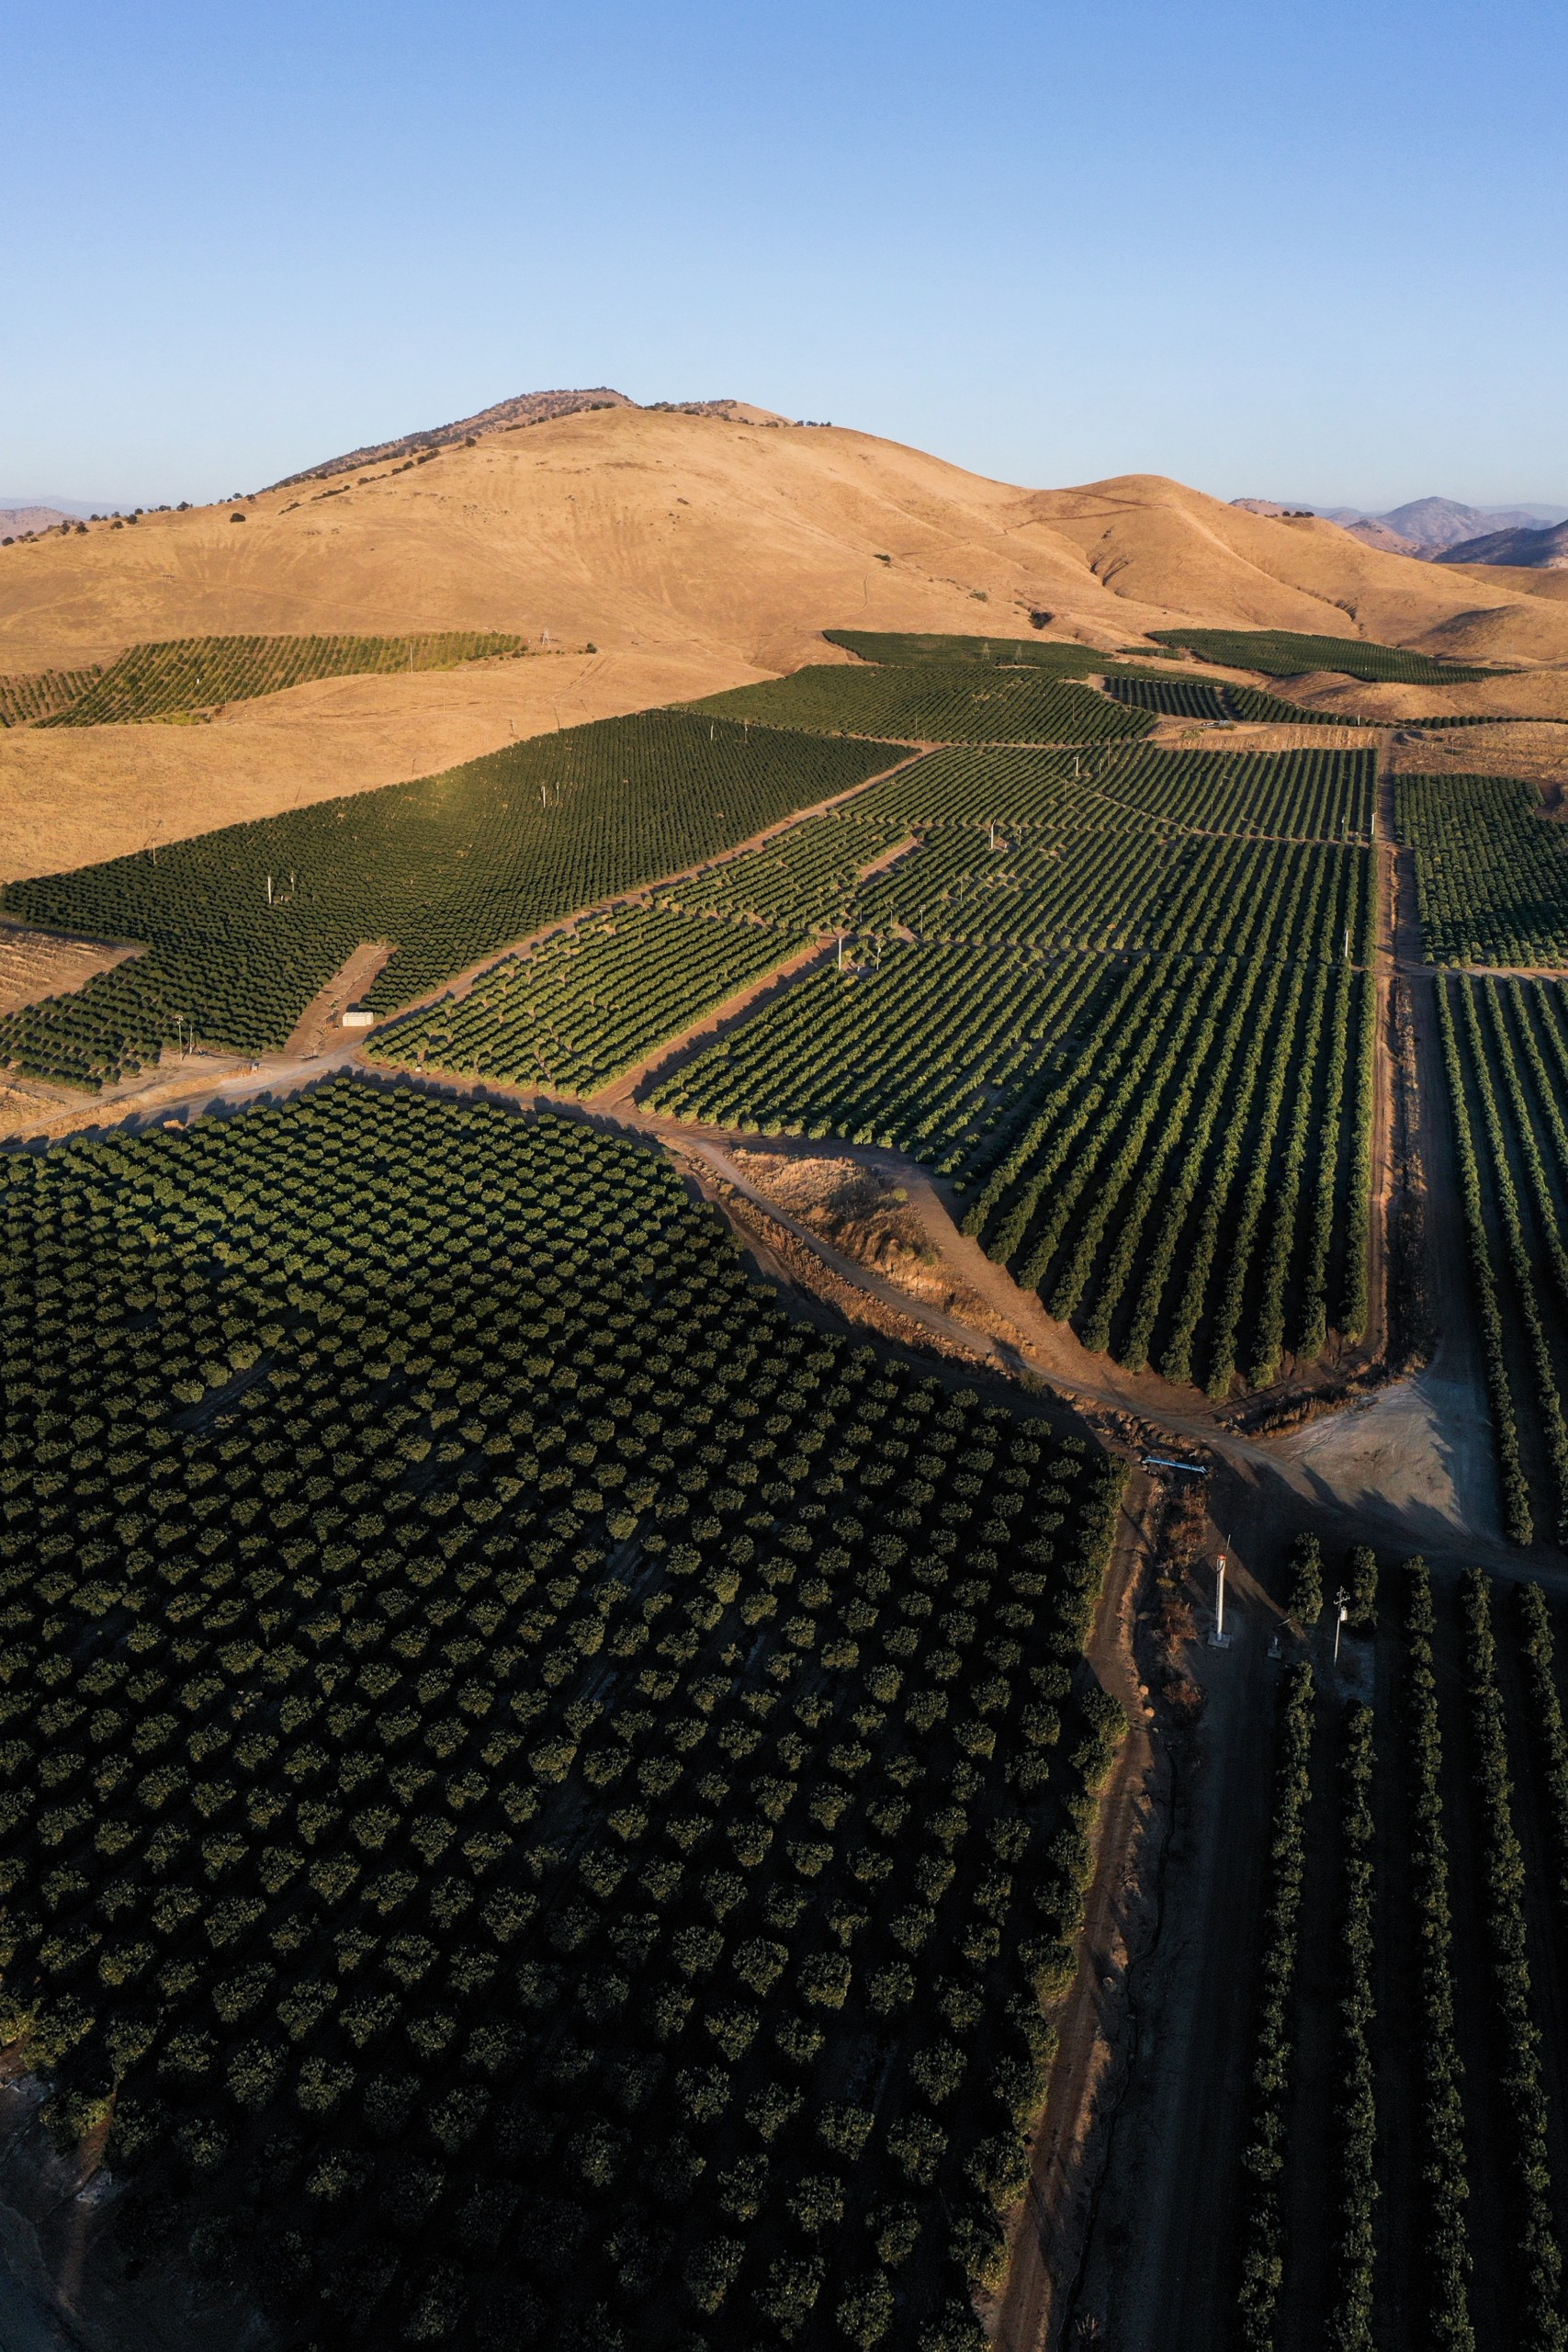 Aerial view of citrus groves at the eastern edge of California's Central San Joaquin Valley